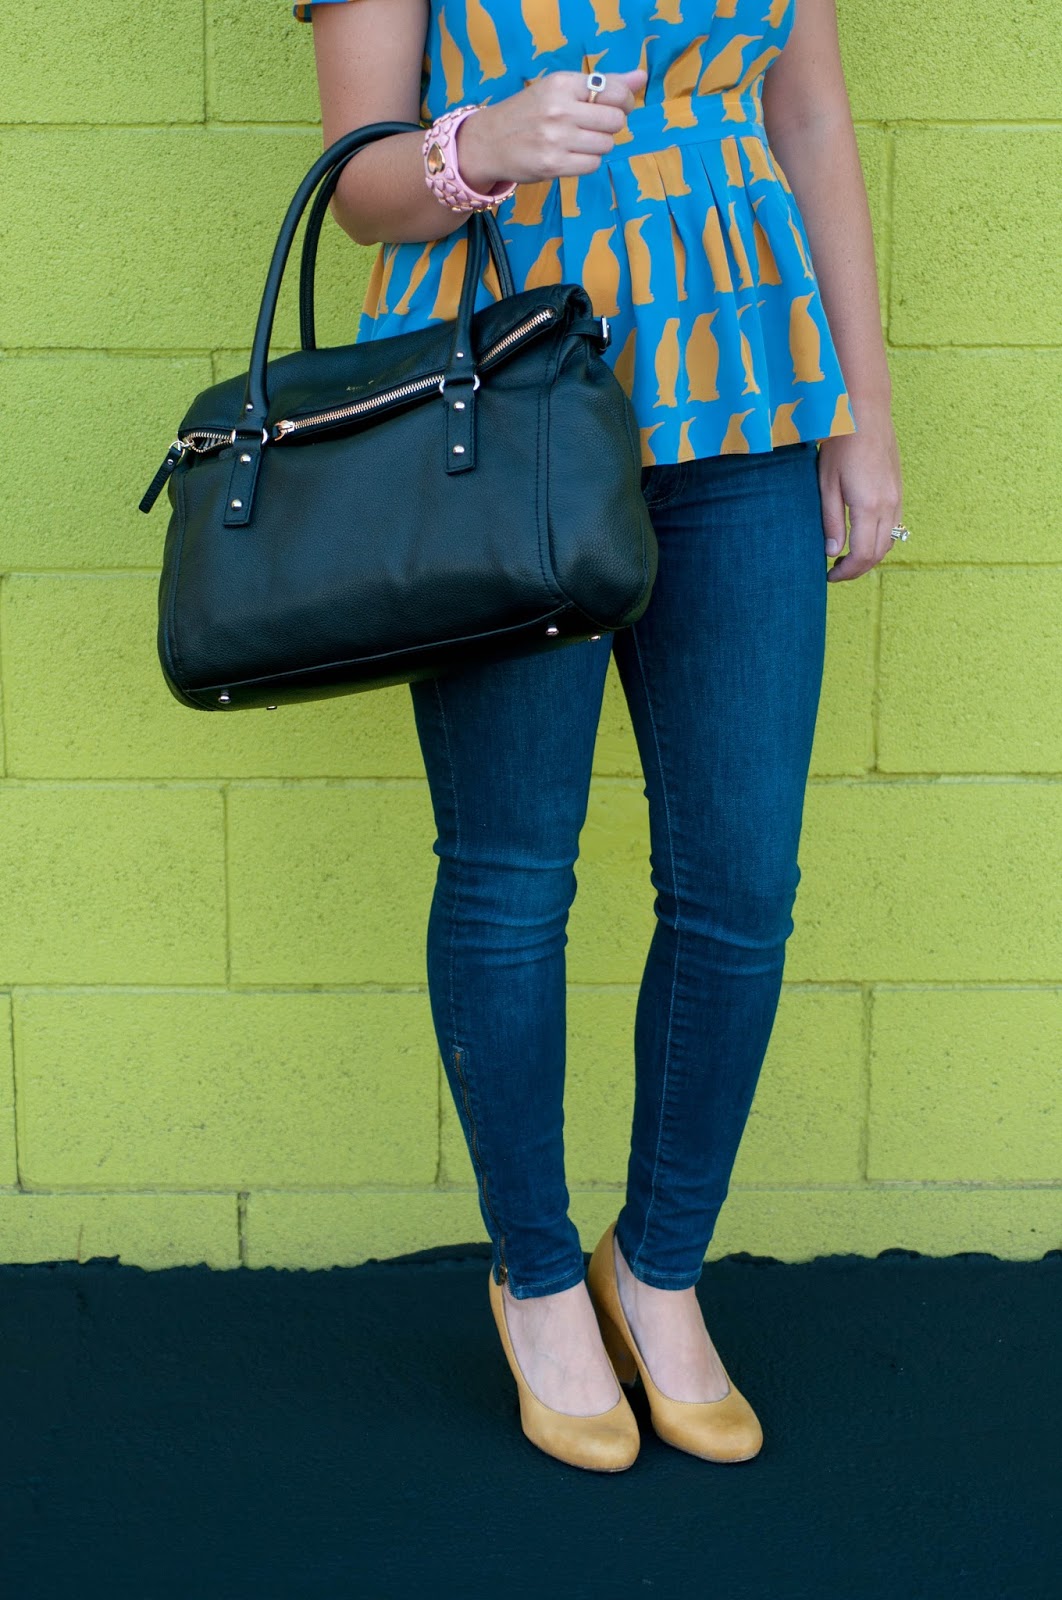 7 for all mankind, 7 jeans, charlotte taylor penguin chiffon blouse, kate spade cobble hill satchel, seychelles